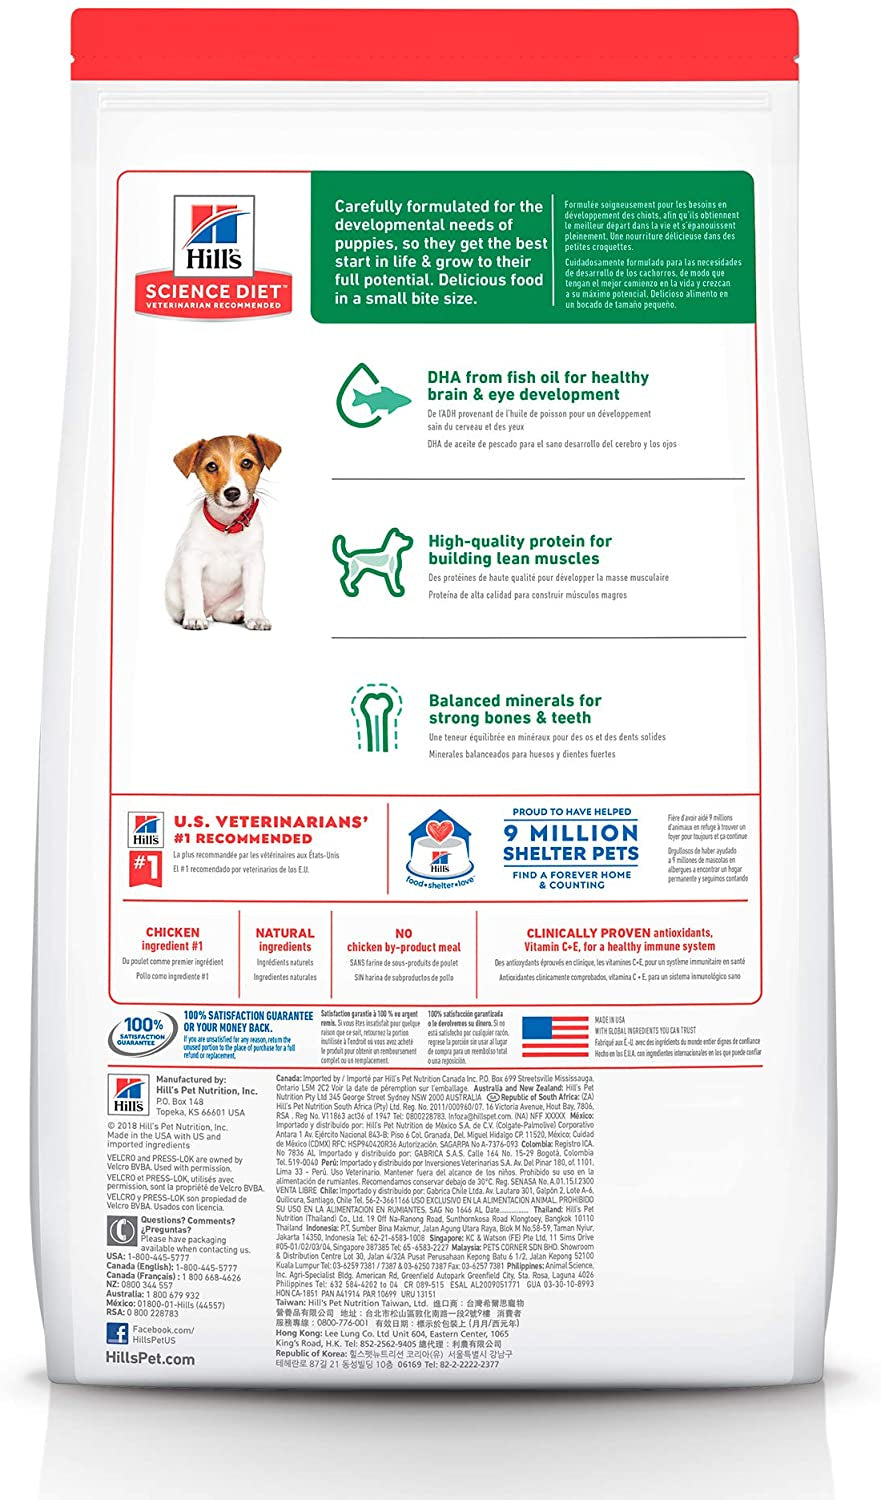 Hill'S Science Diet Dry Dog Food, Puppy, Small Bites, Chicken Meal & Barley Recipe, 15.5 Lb. Bag